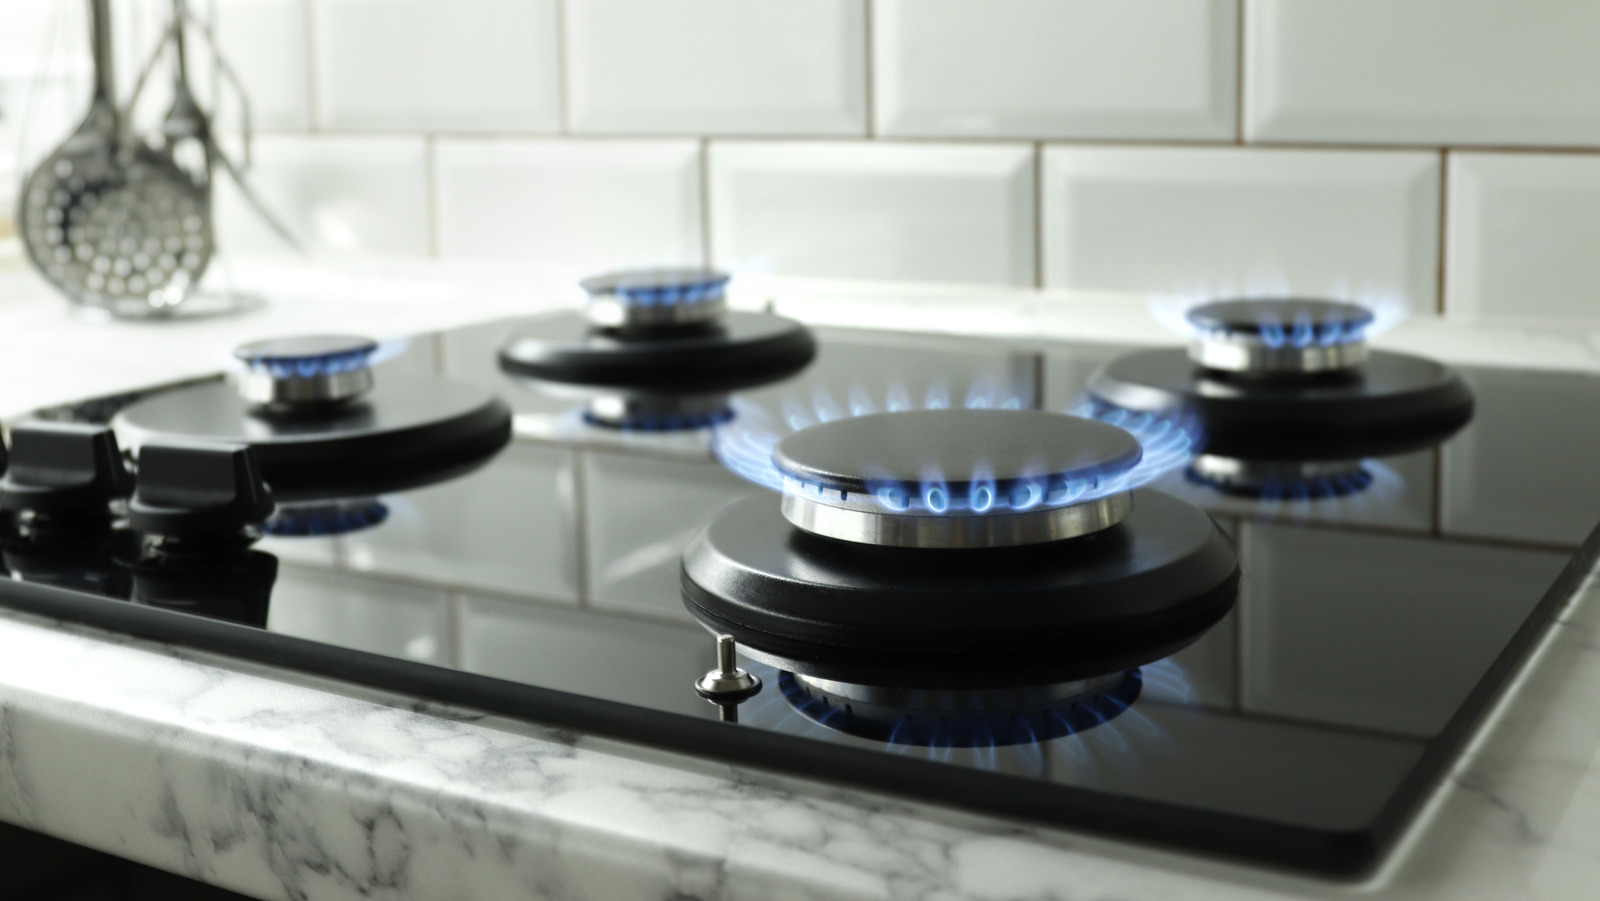 Why It's Better To Use The Back Burners On Your Stove, According